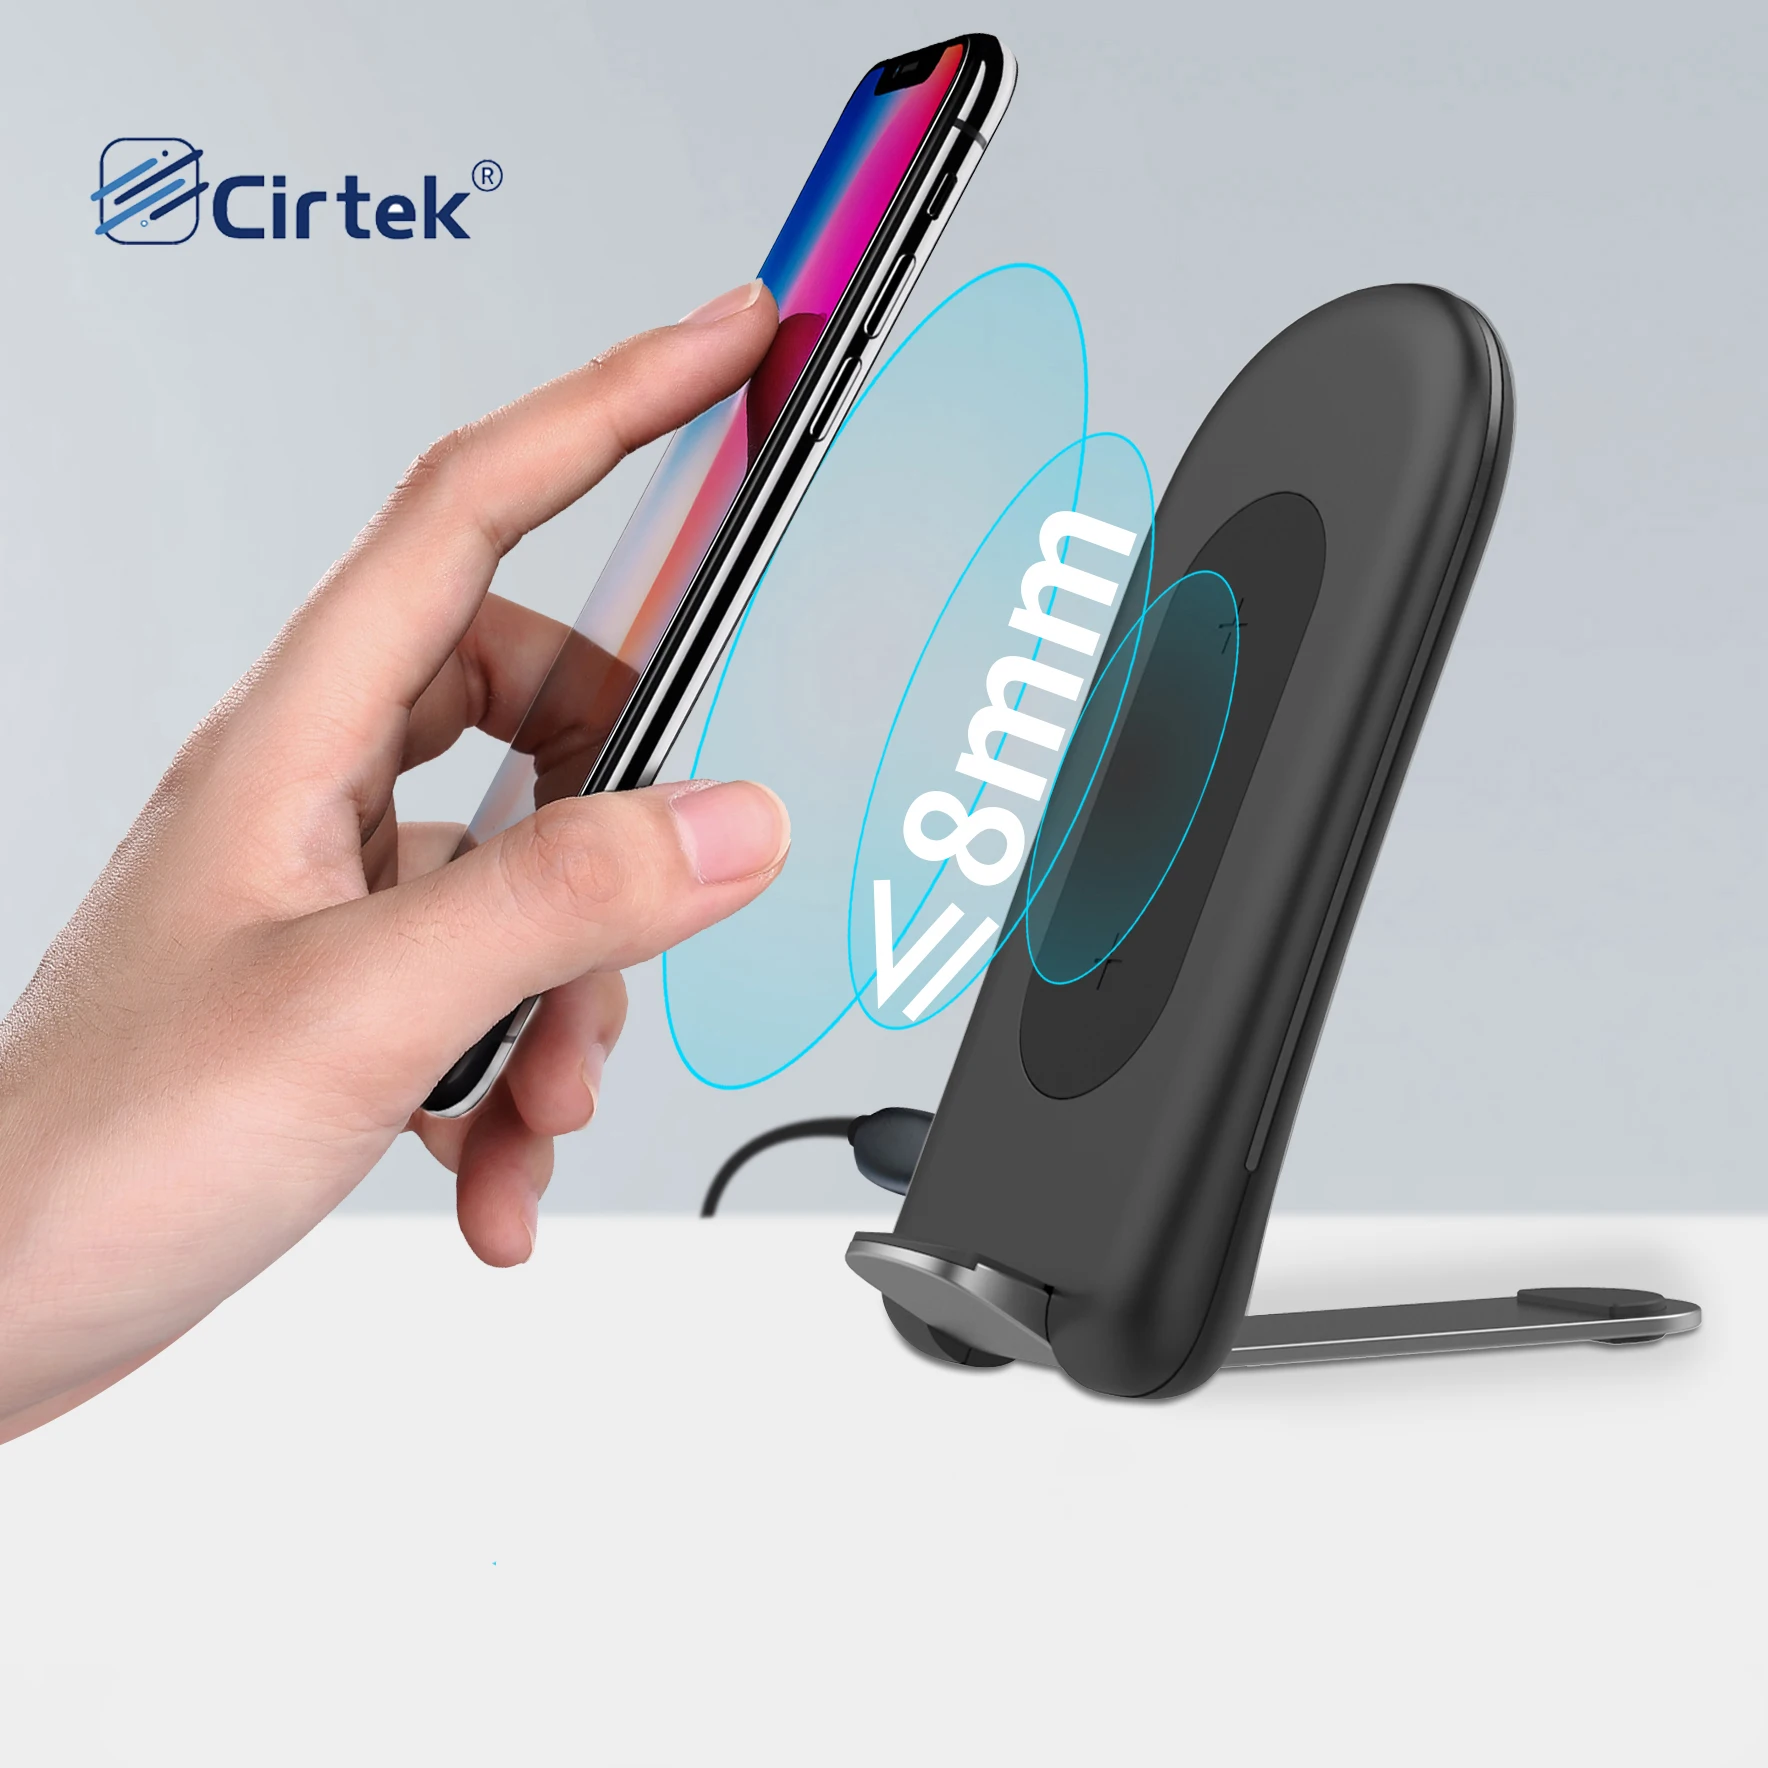 

Cirtek free shipping foldable 15w wireless charging stand for phone qi certified quick charge wireless cell phone charger, Black